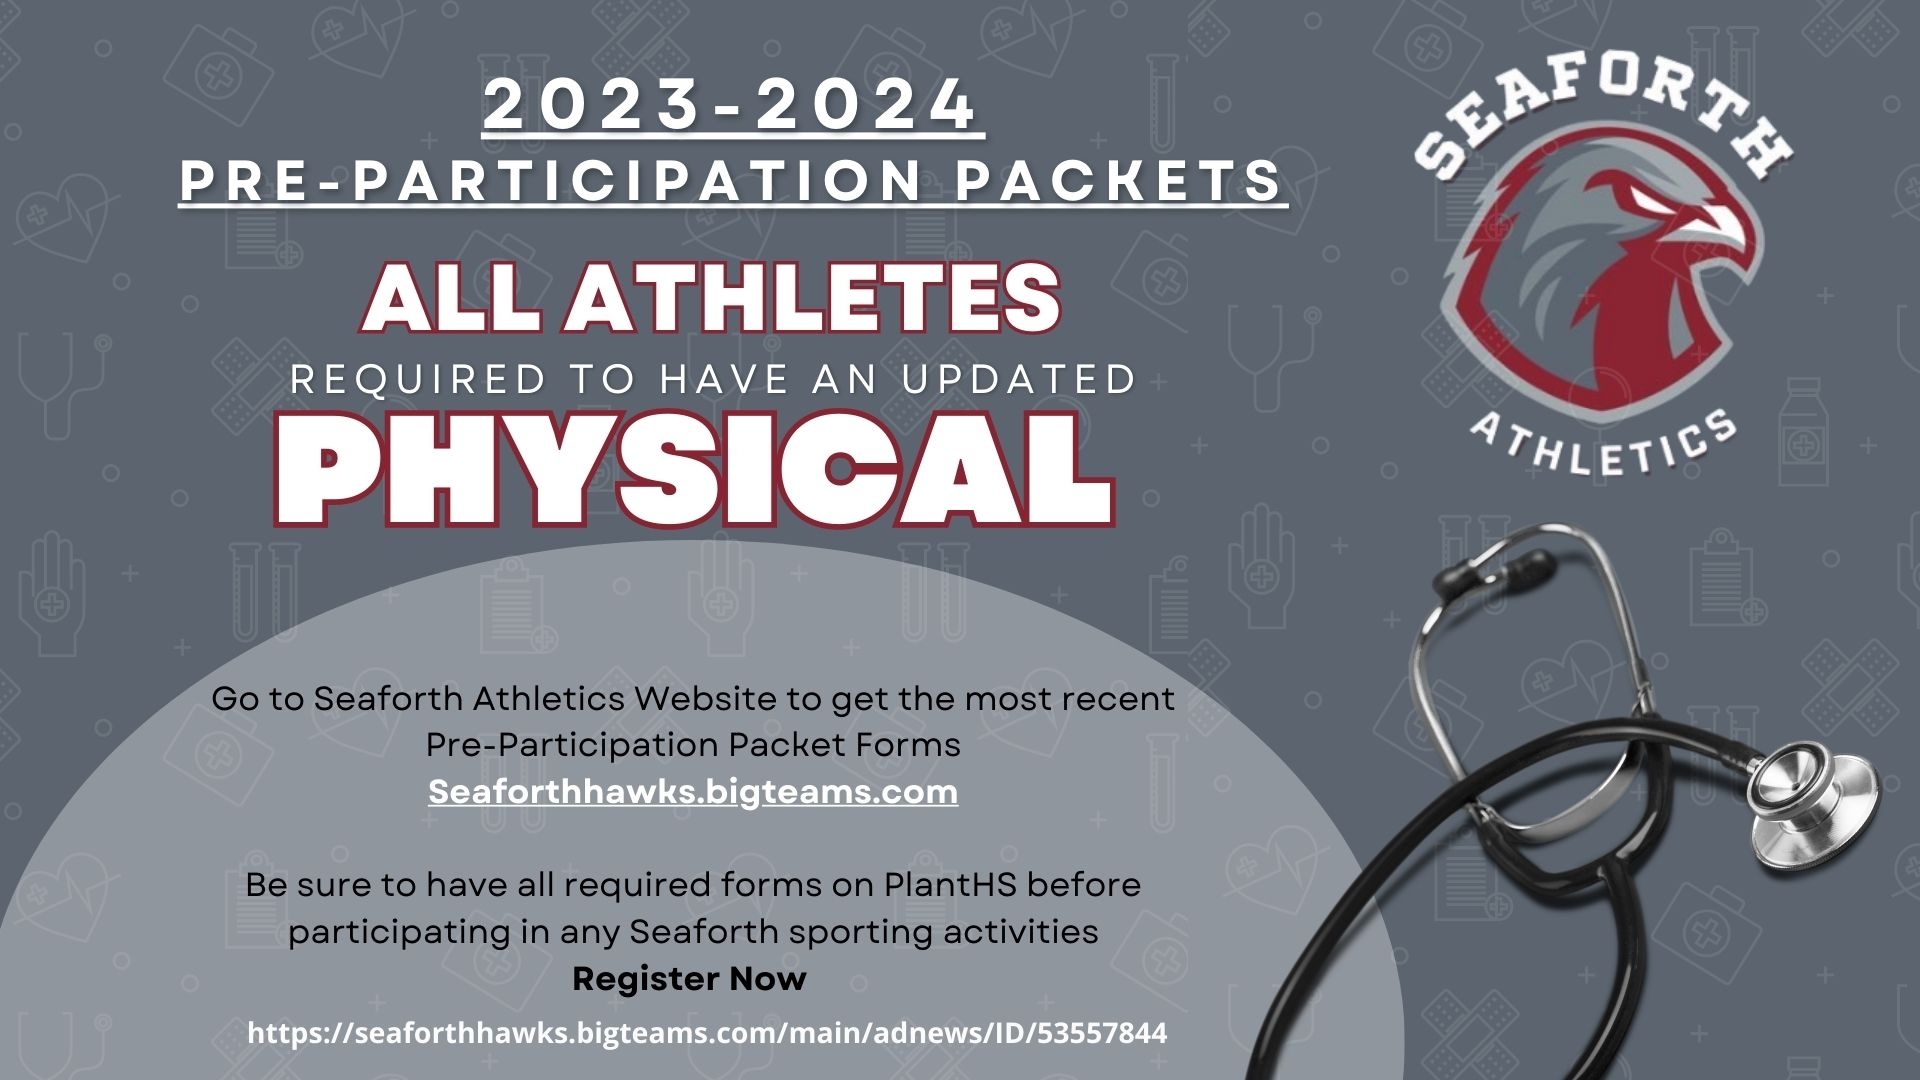 2023-2024 Pre-Participation Packets - Content Image for 146740